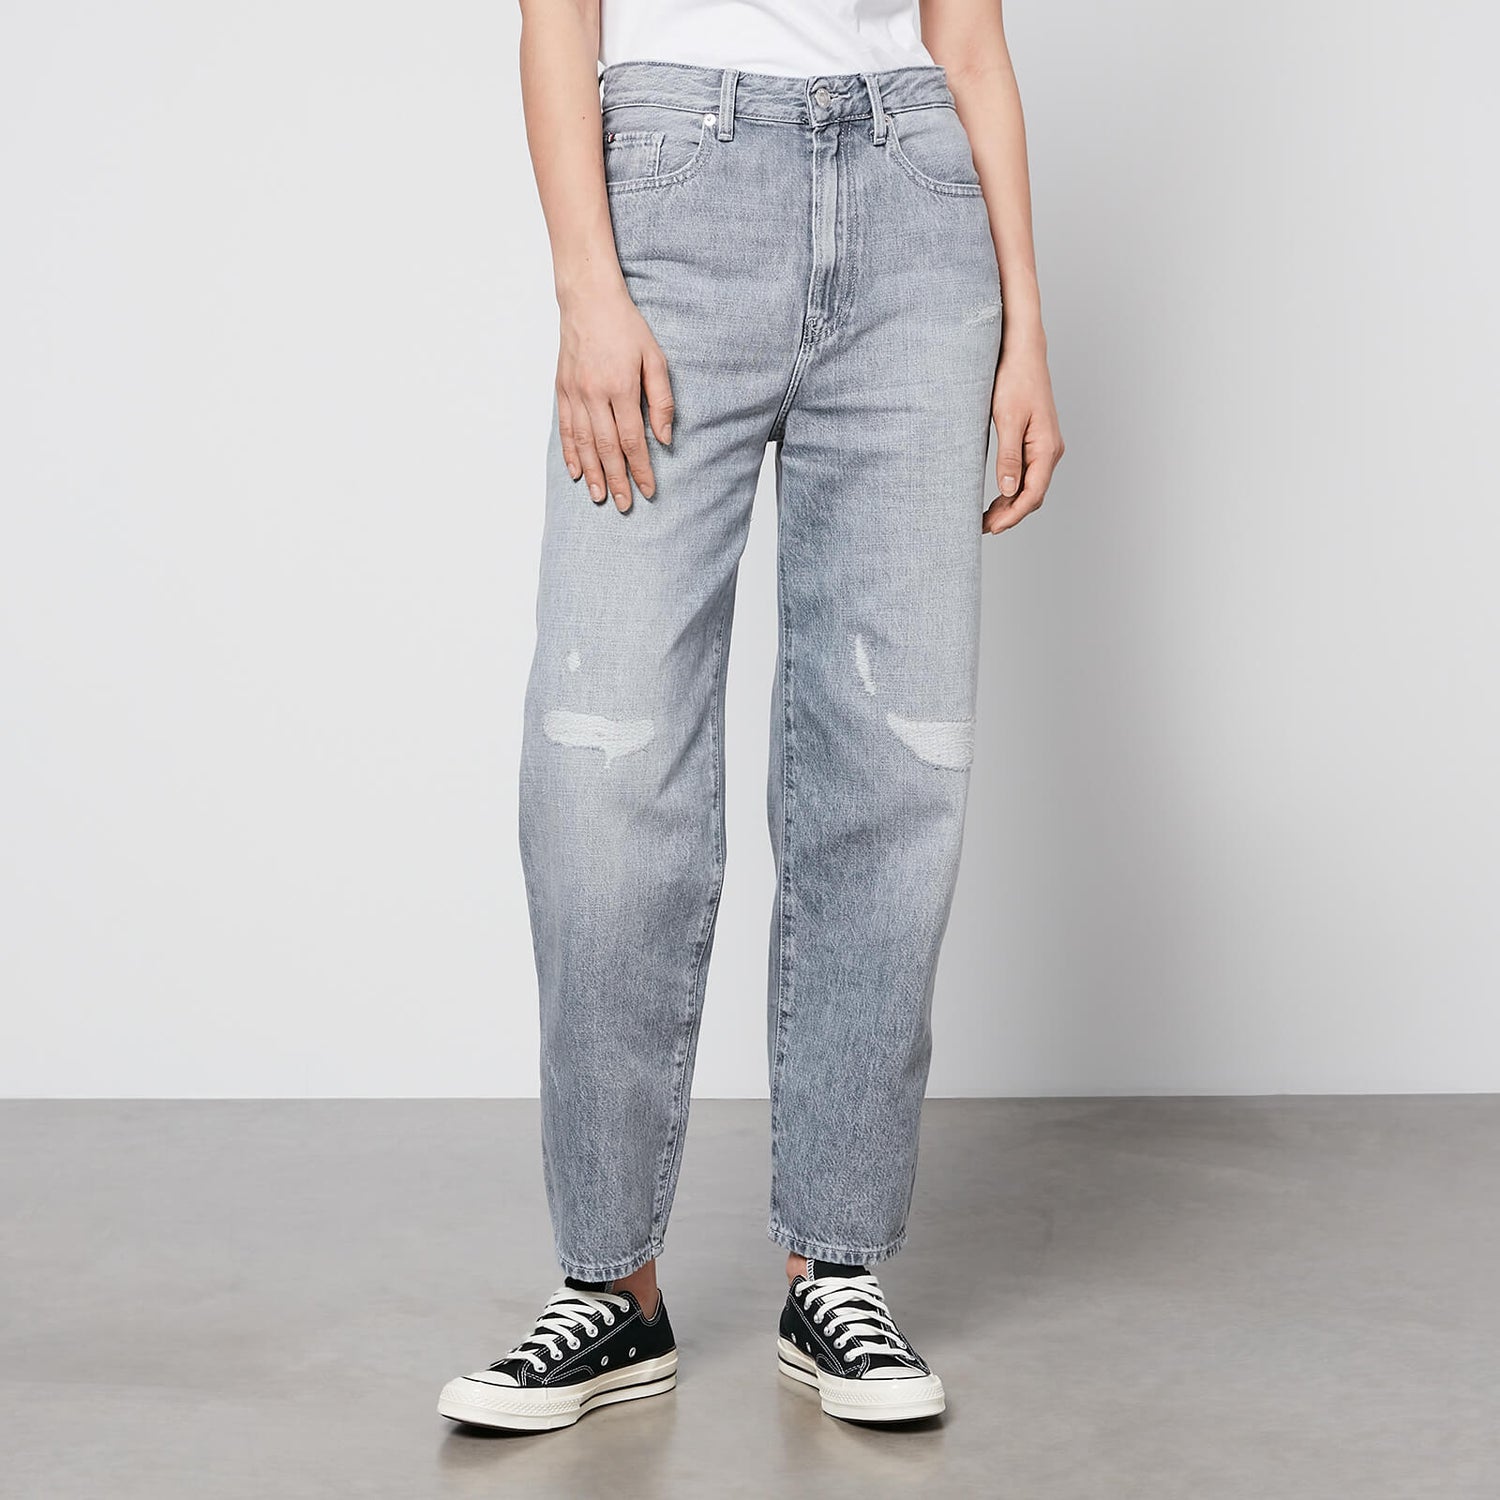 Tommy Hilfiger Balloon High-Waisted Ripped Denim Jeans - W26